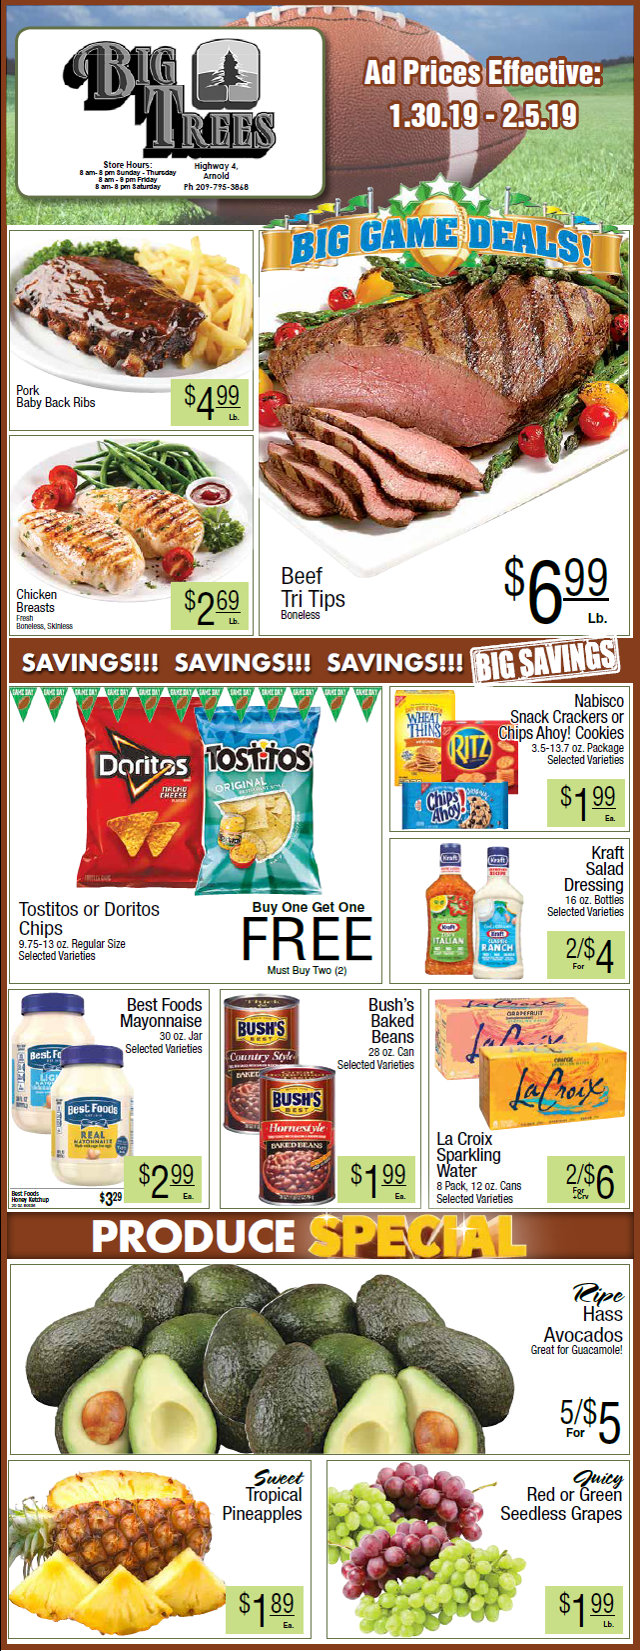 Big Trees Market Weekly Ad & Grocery Specials Through February 5th